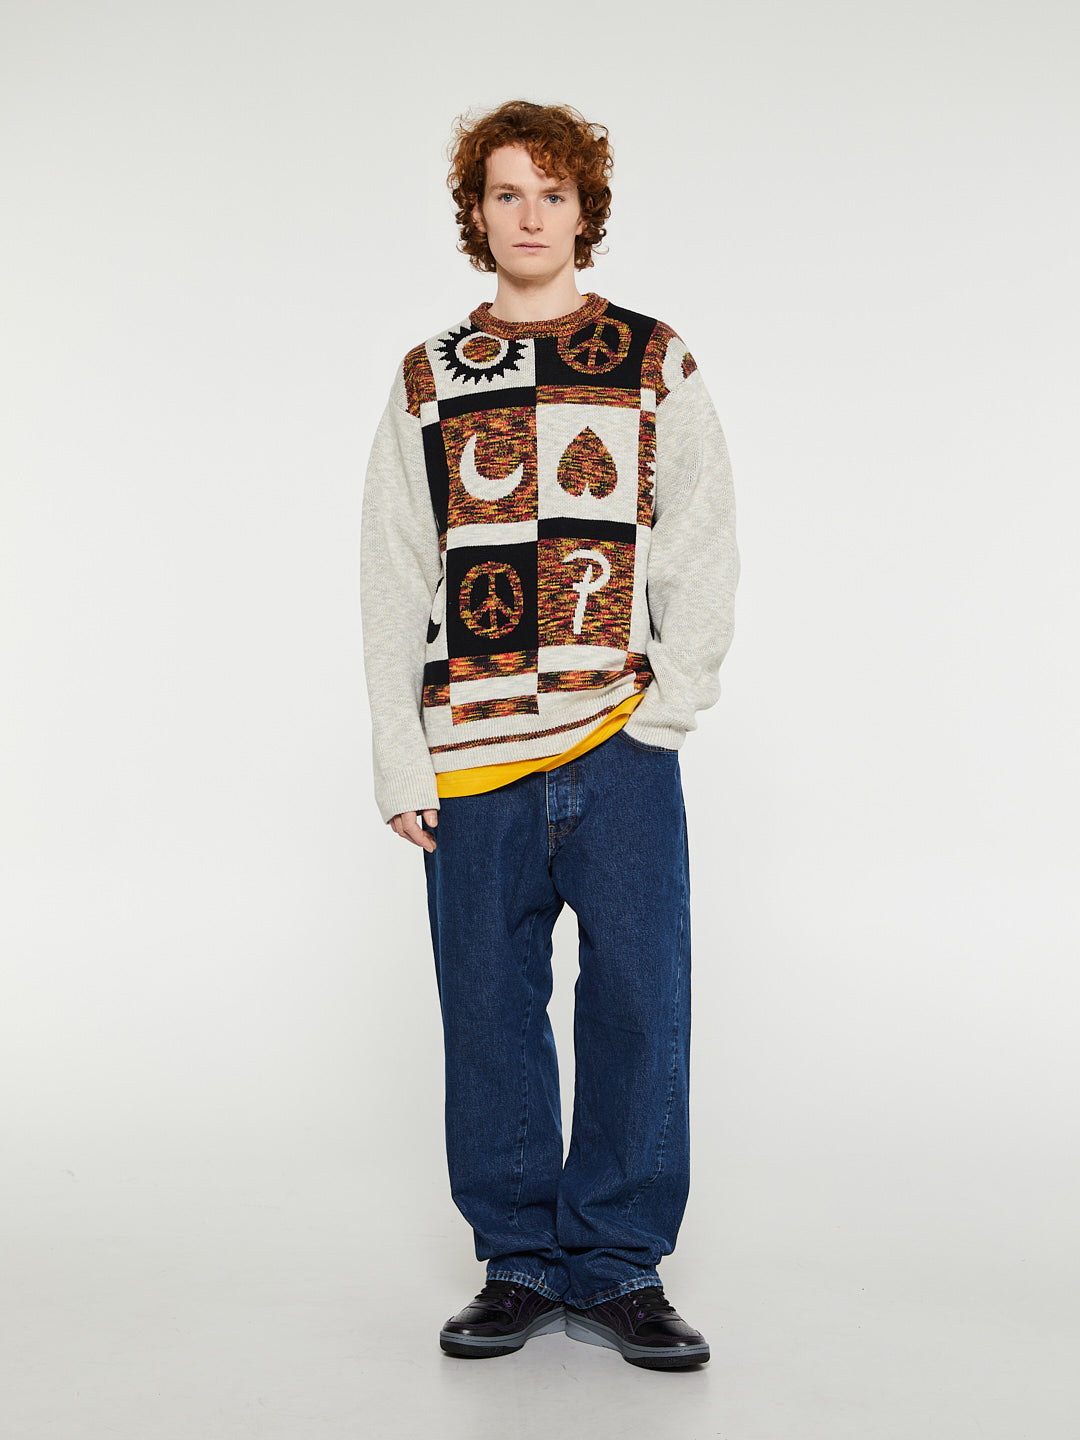 Jacquard Crayon Knitted Sweater in Space Dye and Dark Blue